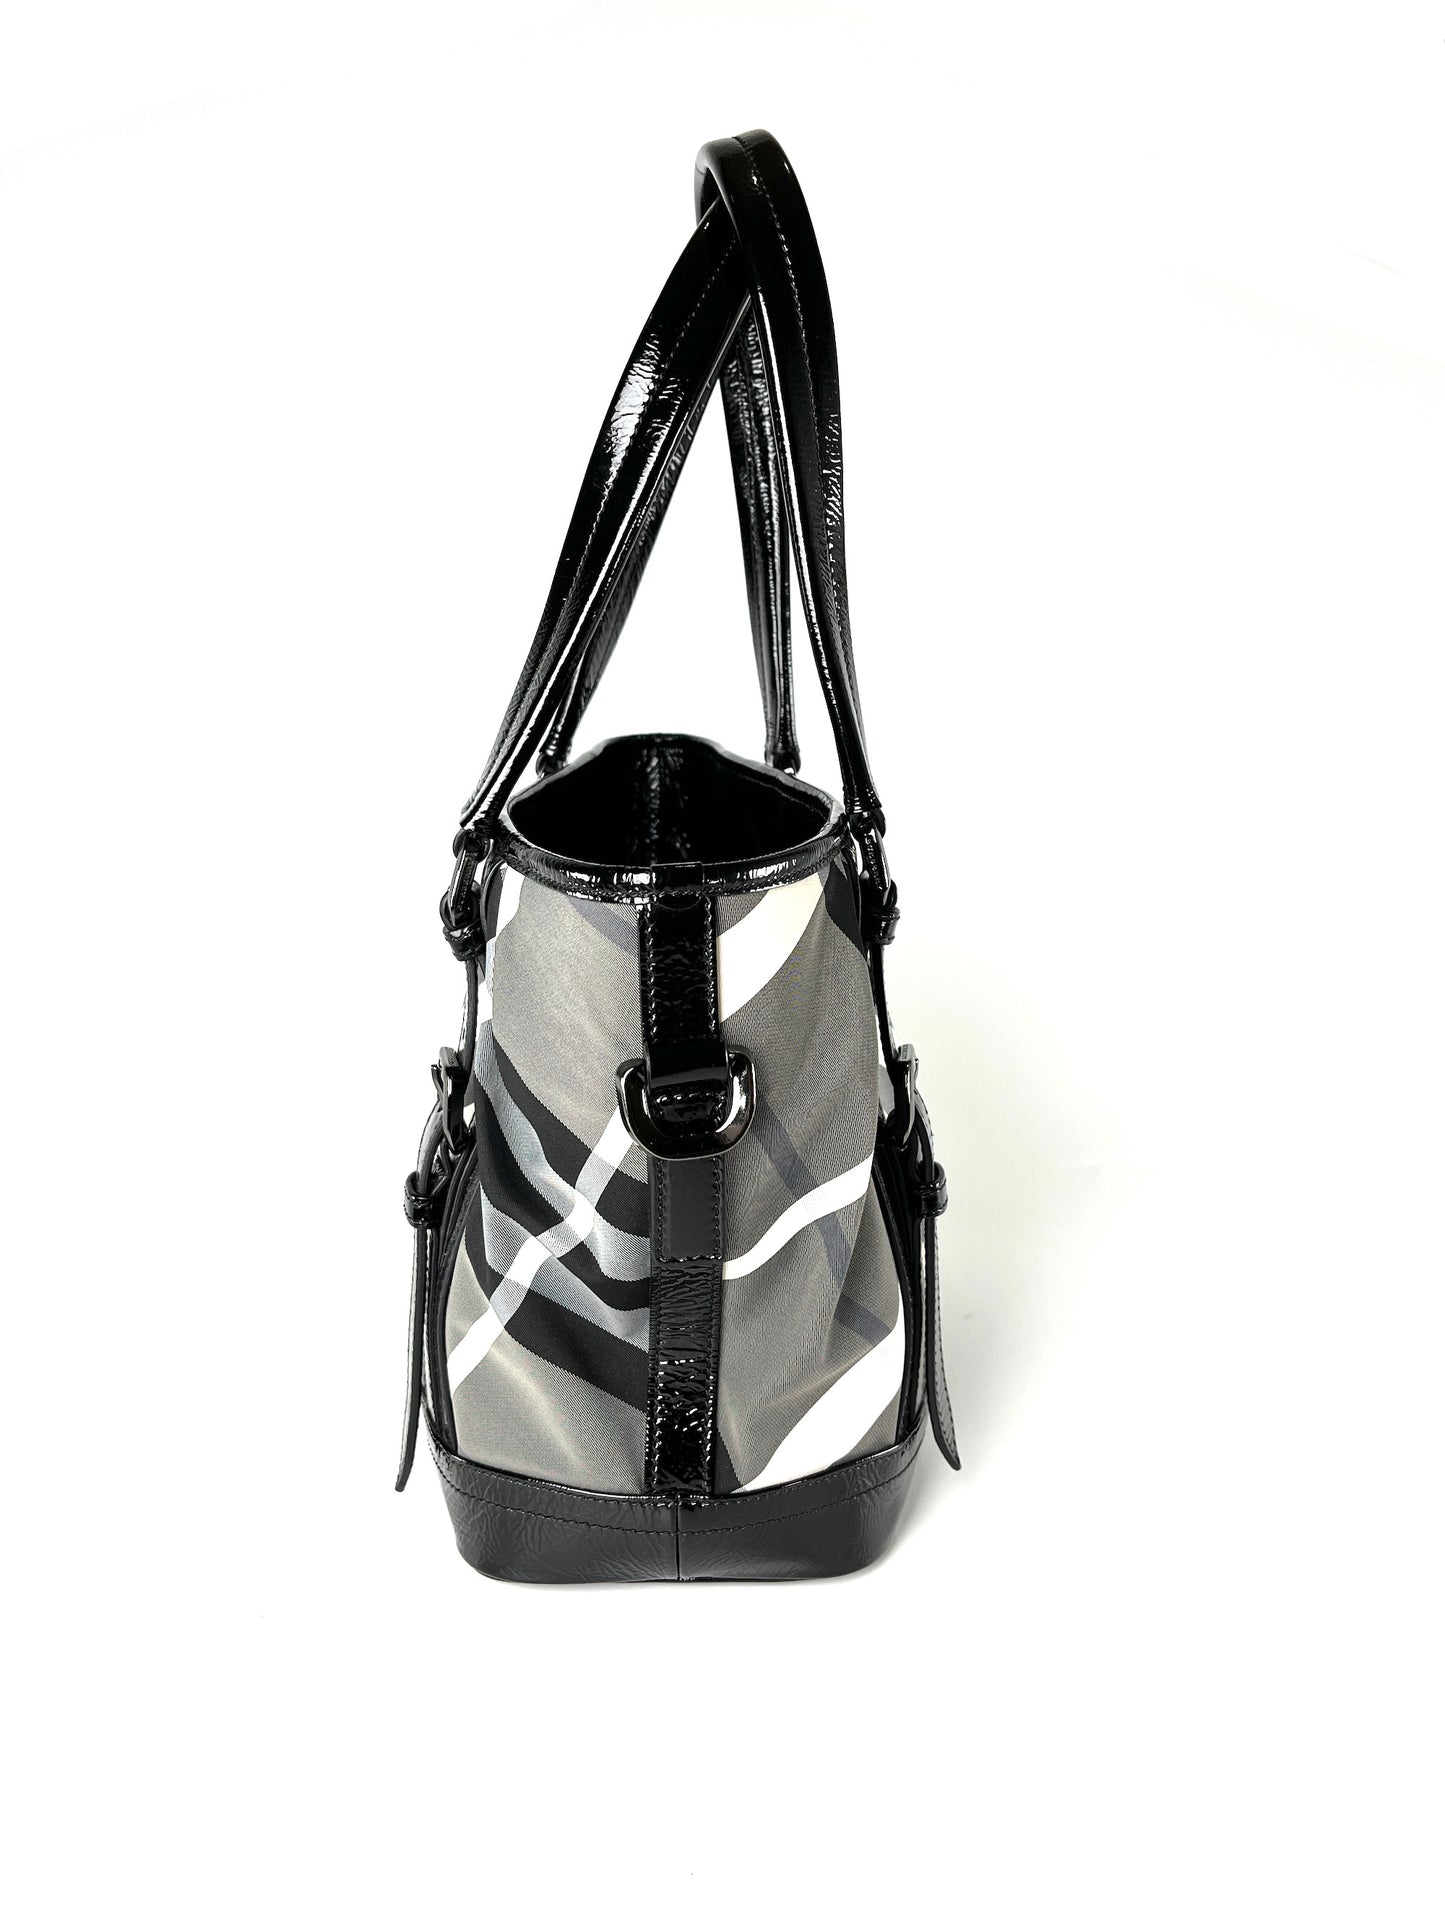 Burberry Nylon Leather Black Beat Check Lowry Tote Bag